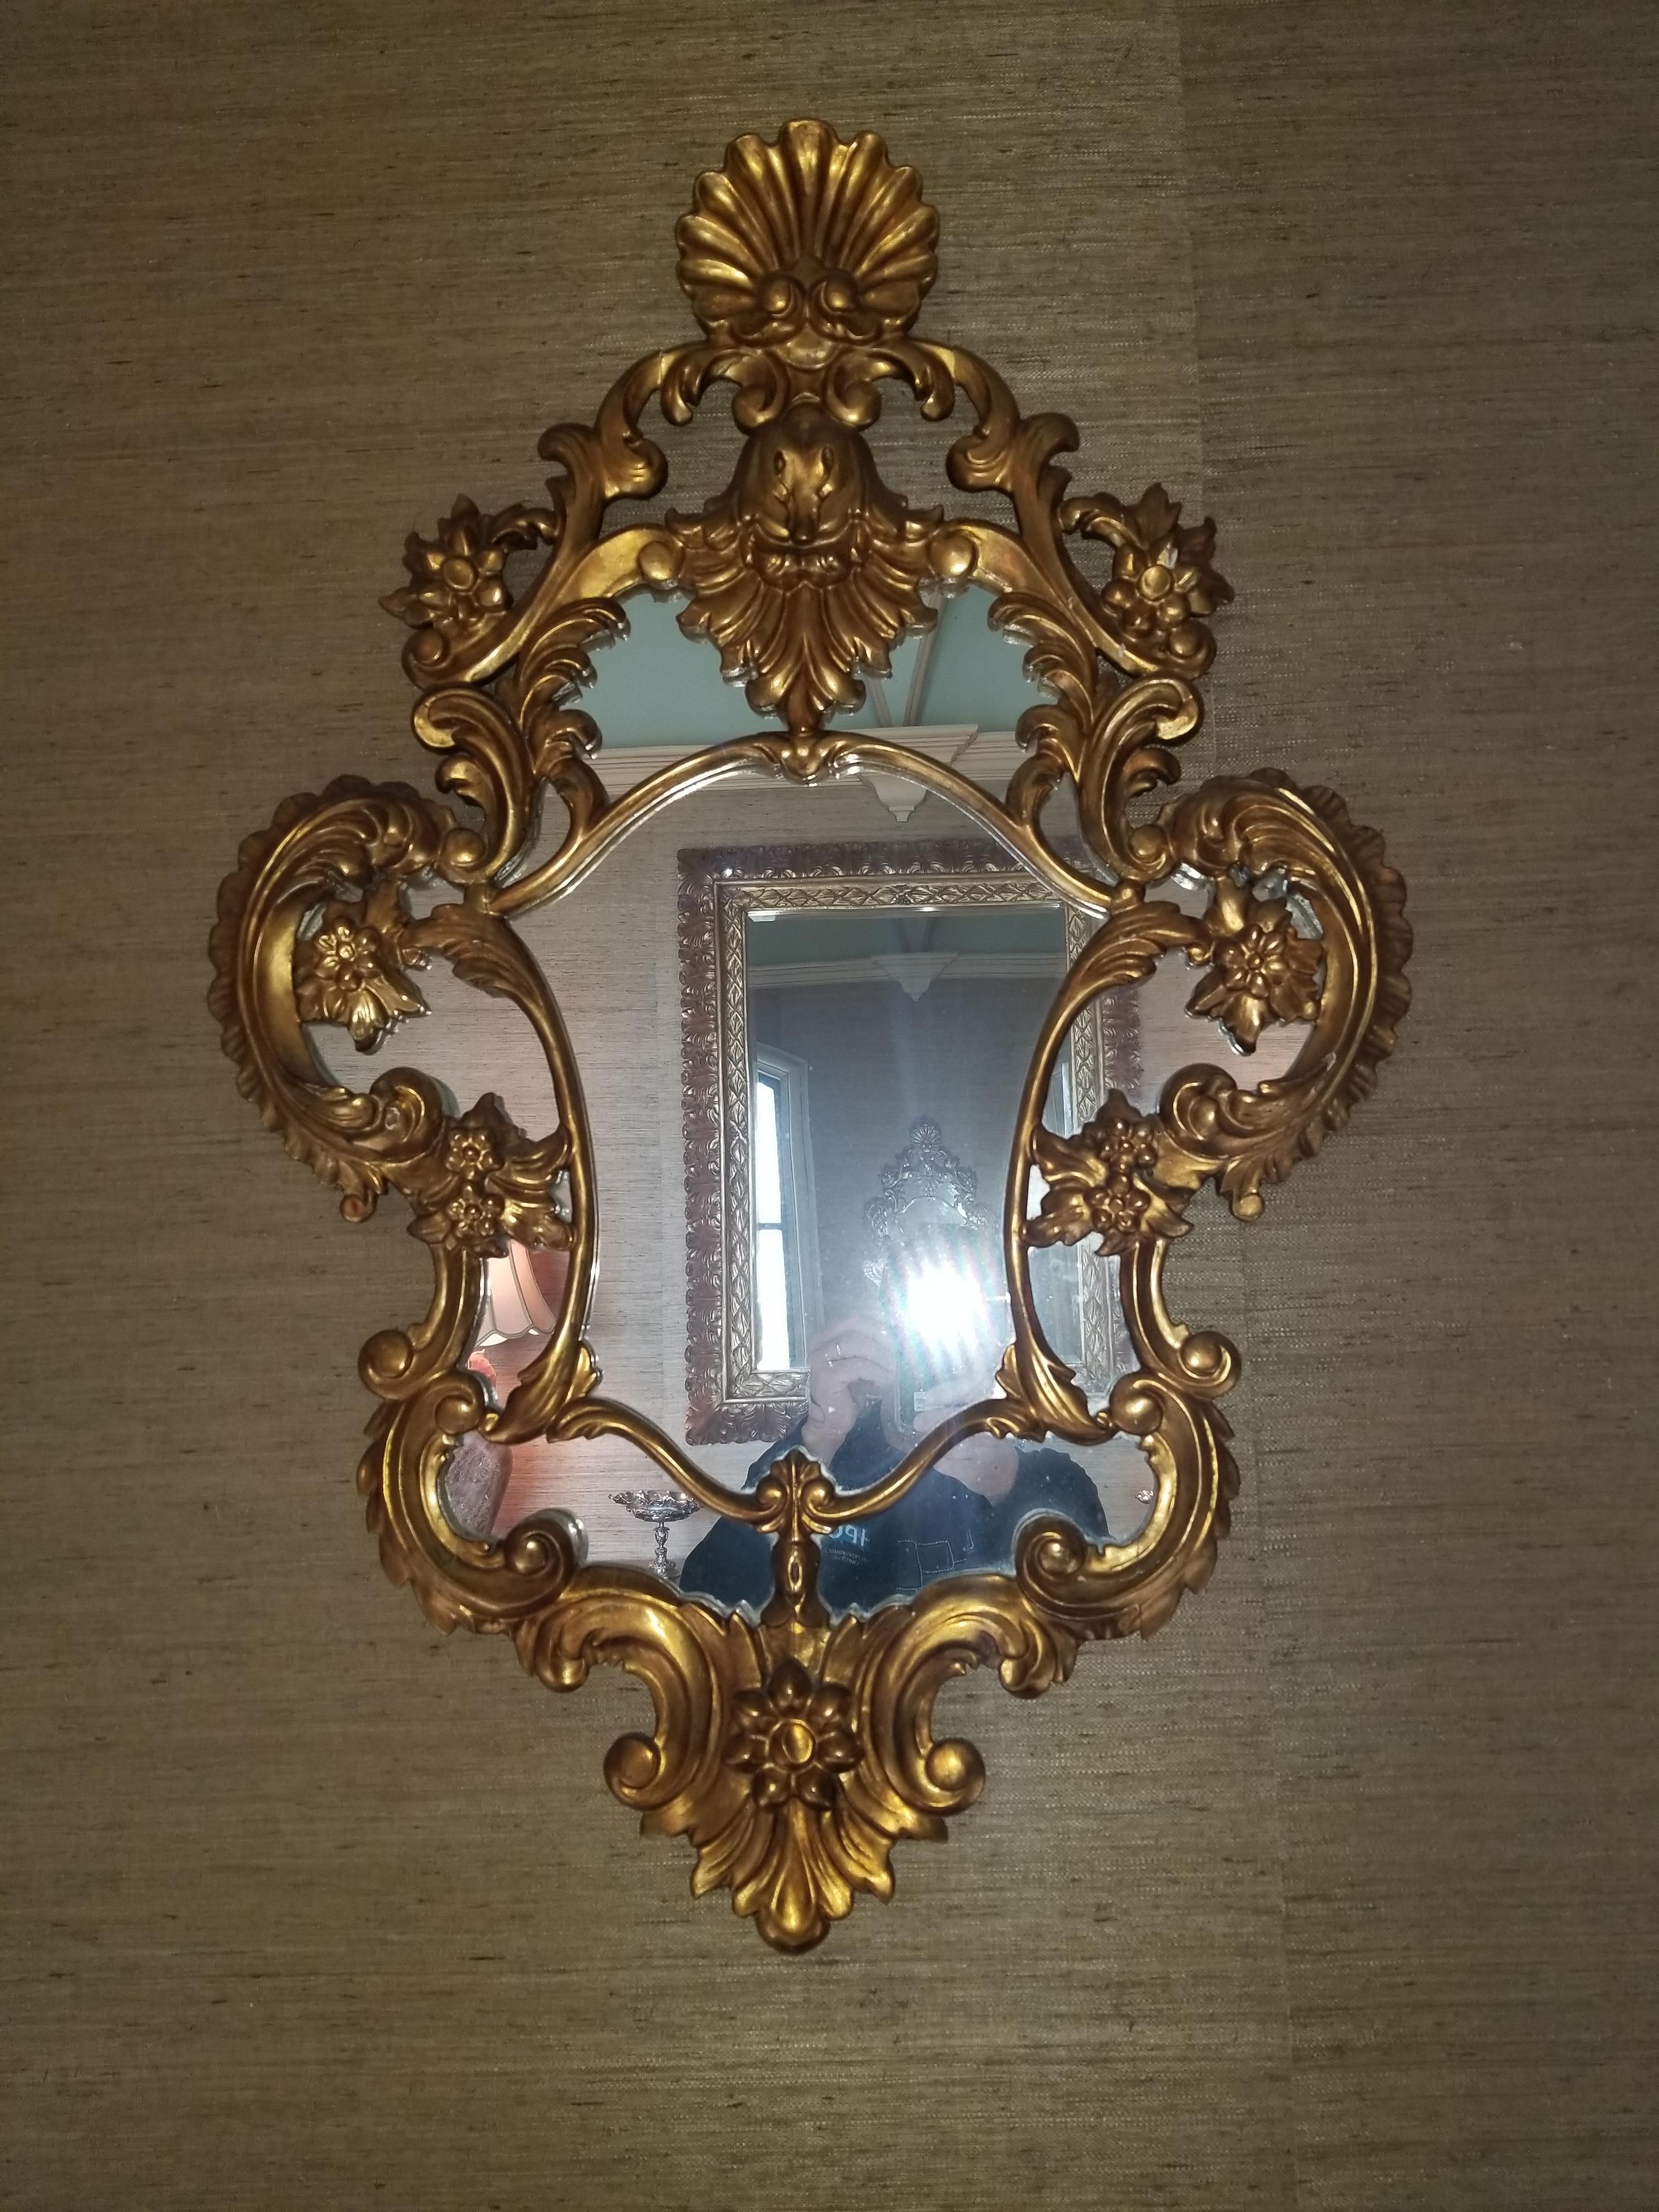 Gold Leaf Pair of Giltwood Mirrors with a Shell Motif at Top, 20th Century